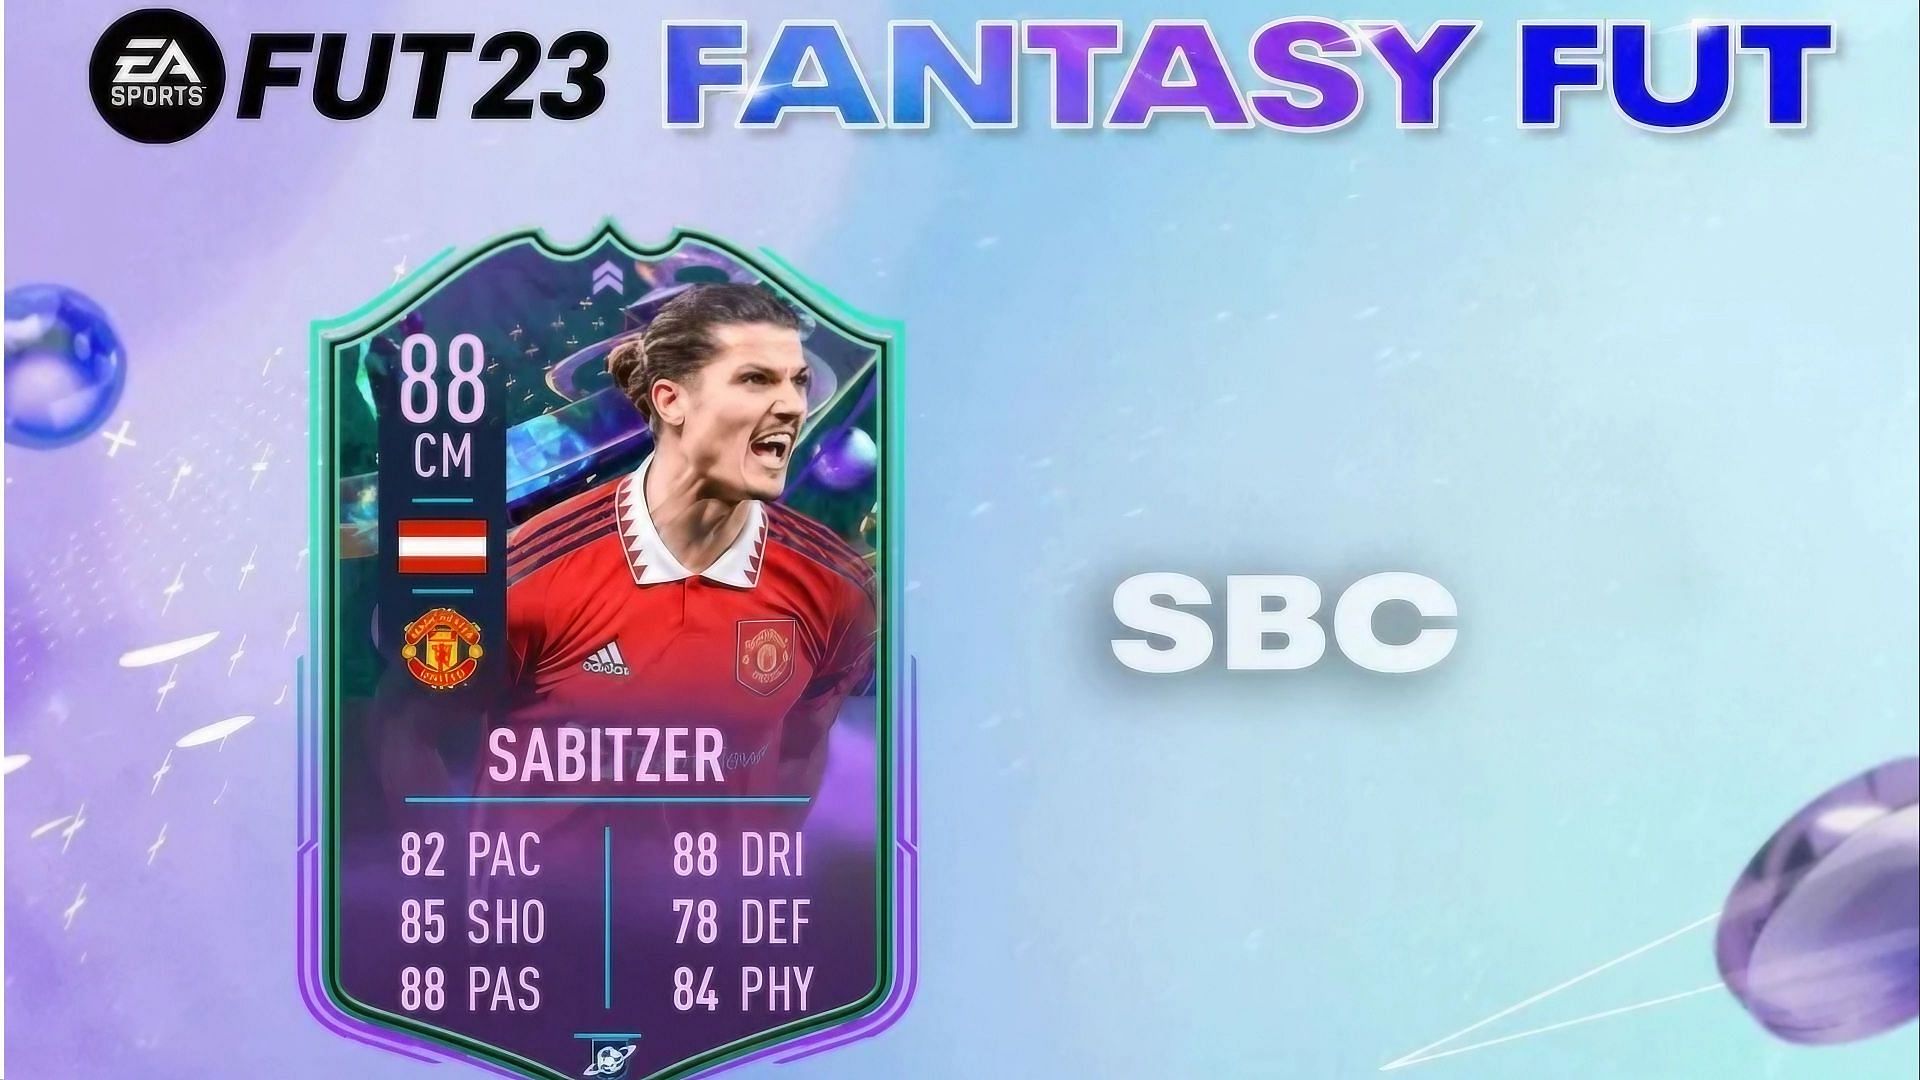 The Marcel Sabitzer Fantasy FUT SBC could become a valuable asset in FIFA 23 with a few upgrades (Image via EA Sports)